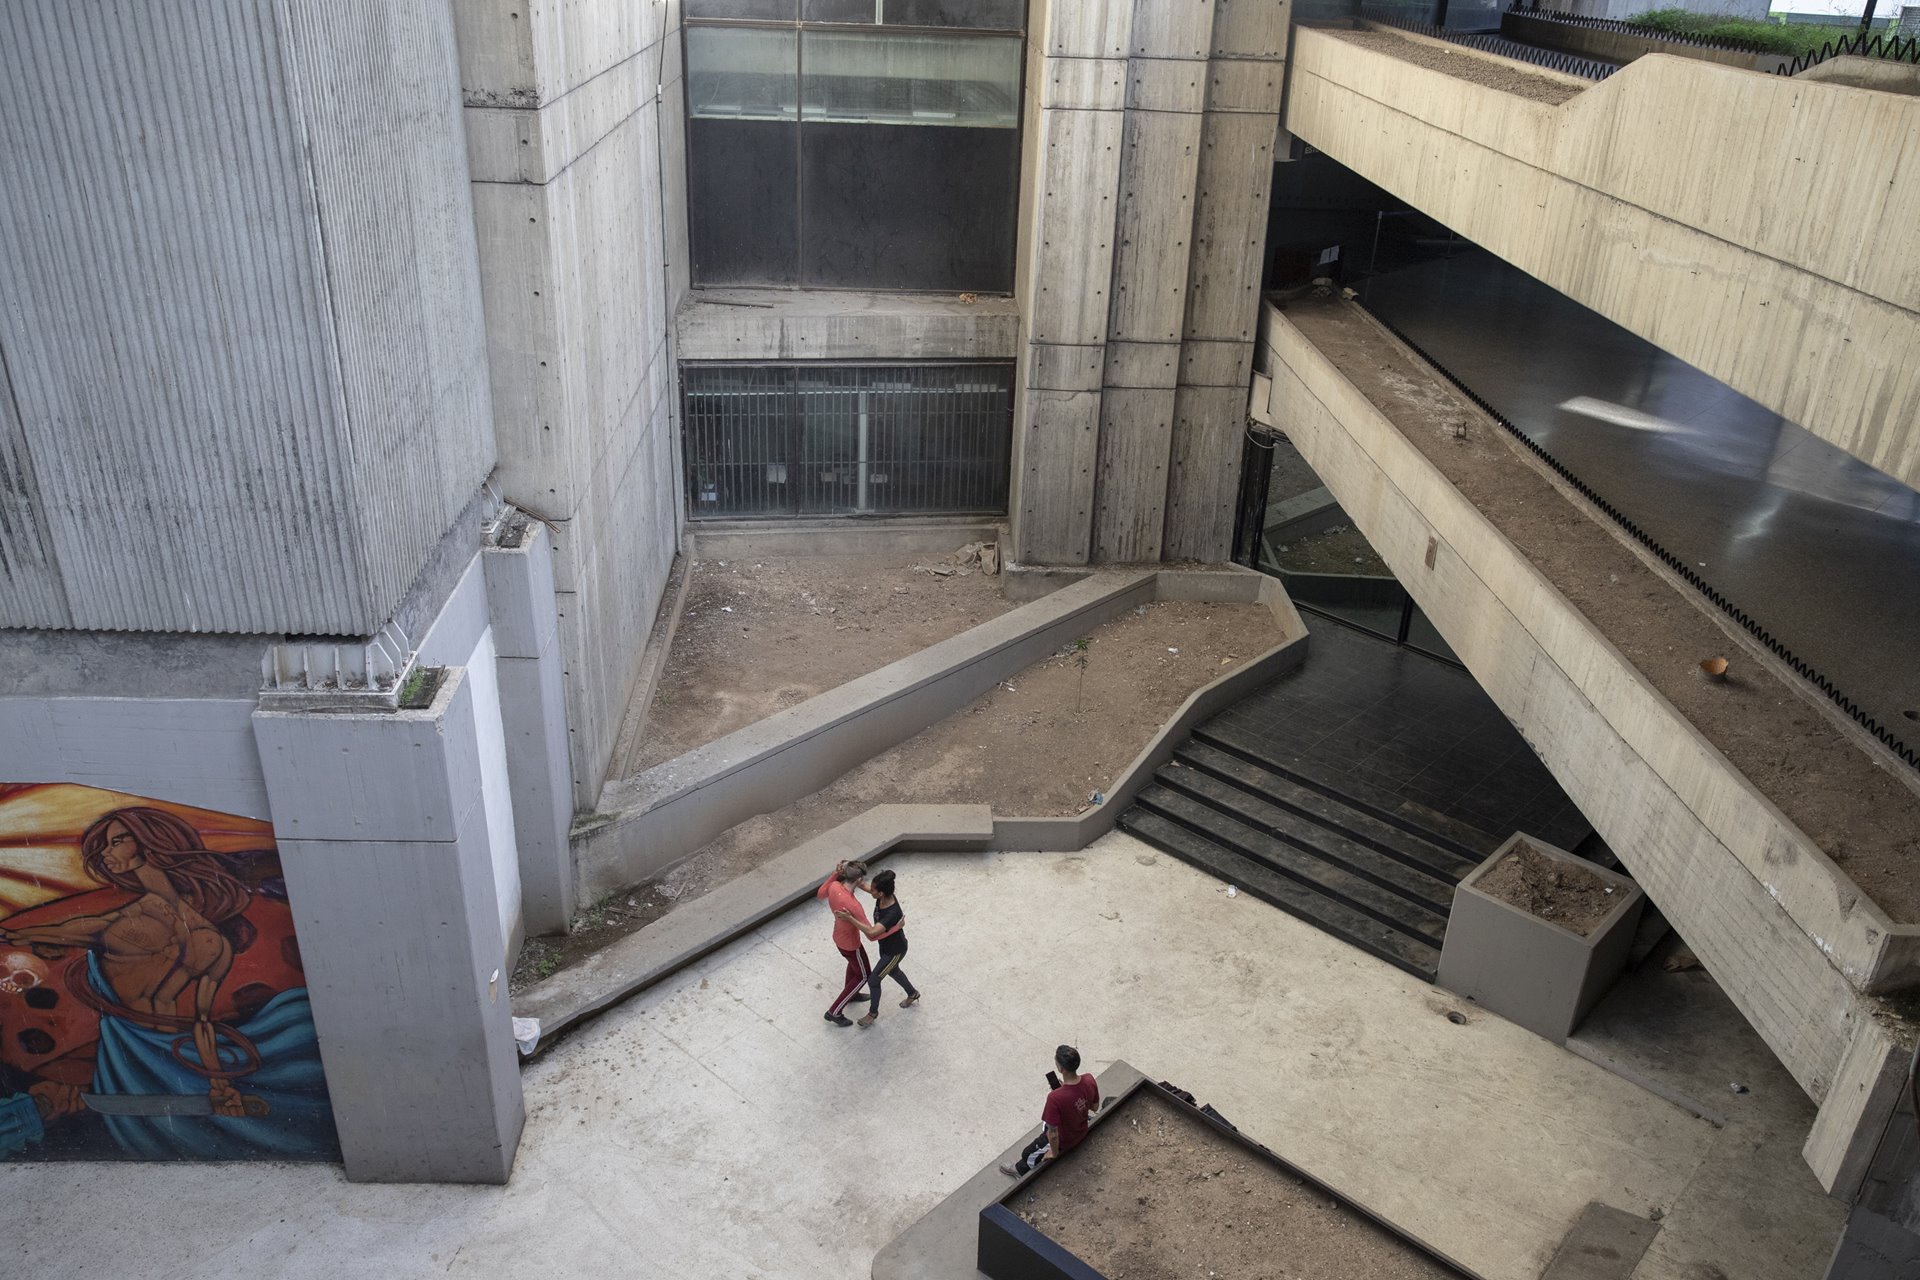 <p>A couple dances the tango in a Parque Central courtyard in Caracas, Venezuela. Built in the 1970s, the complex was once a prestigious address, with two towers that until 2003 held the title of tallest skyscrapers in Latin America. Now the buildings leak, are badly maintained, and insecure.</p>
